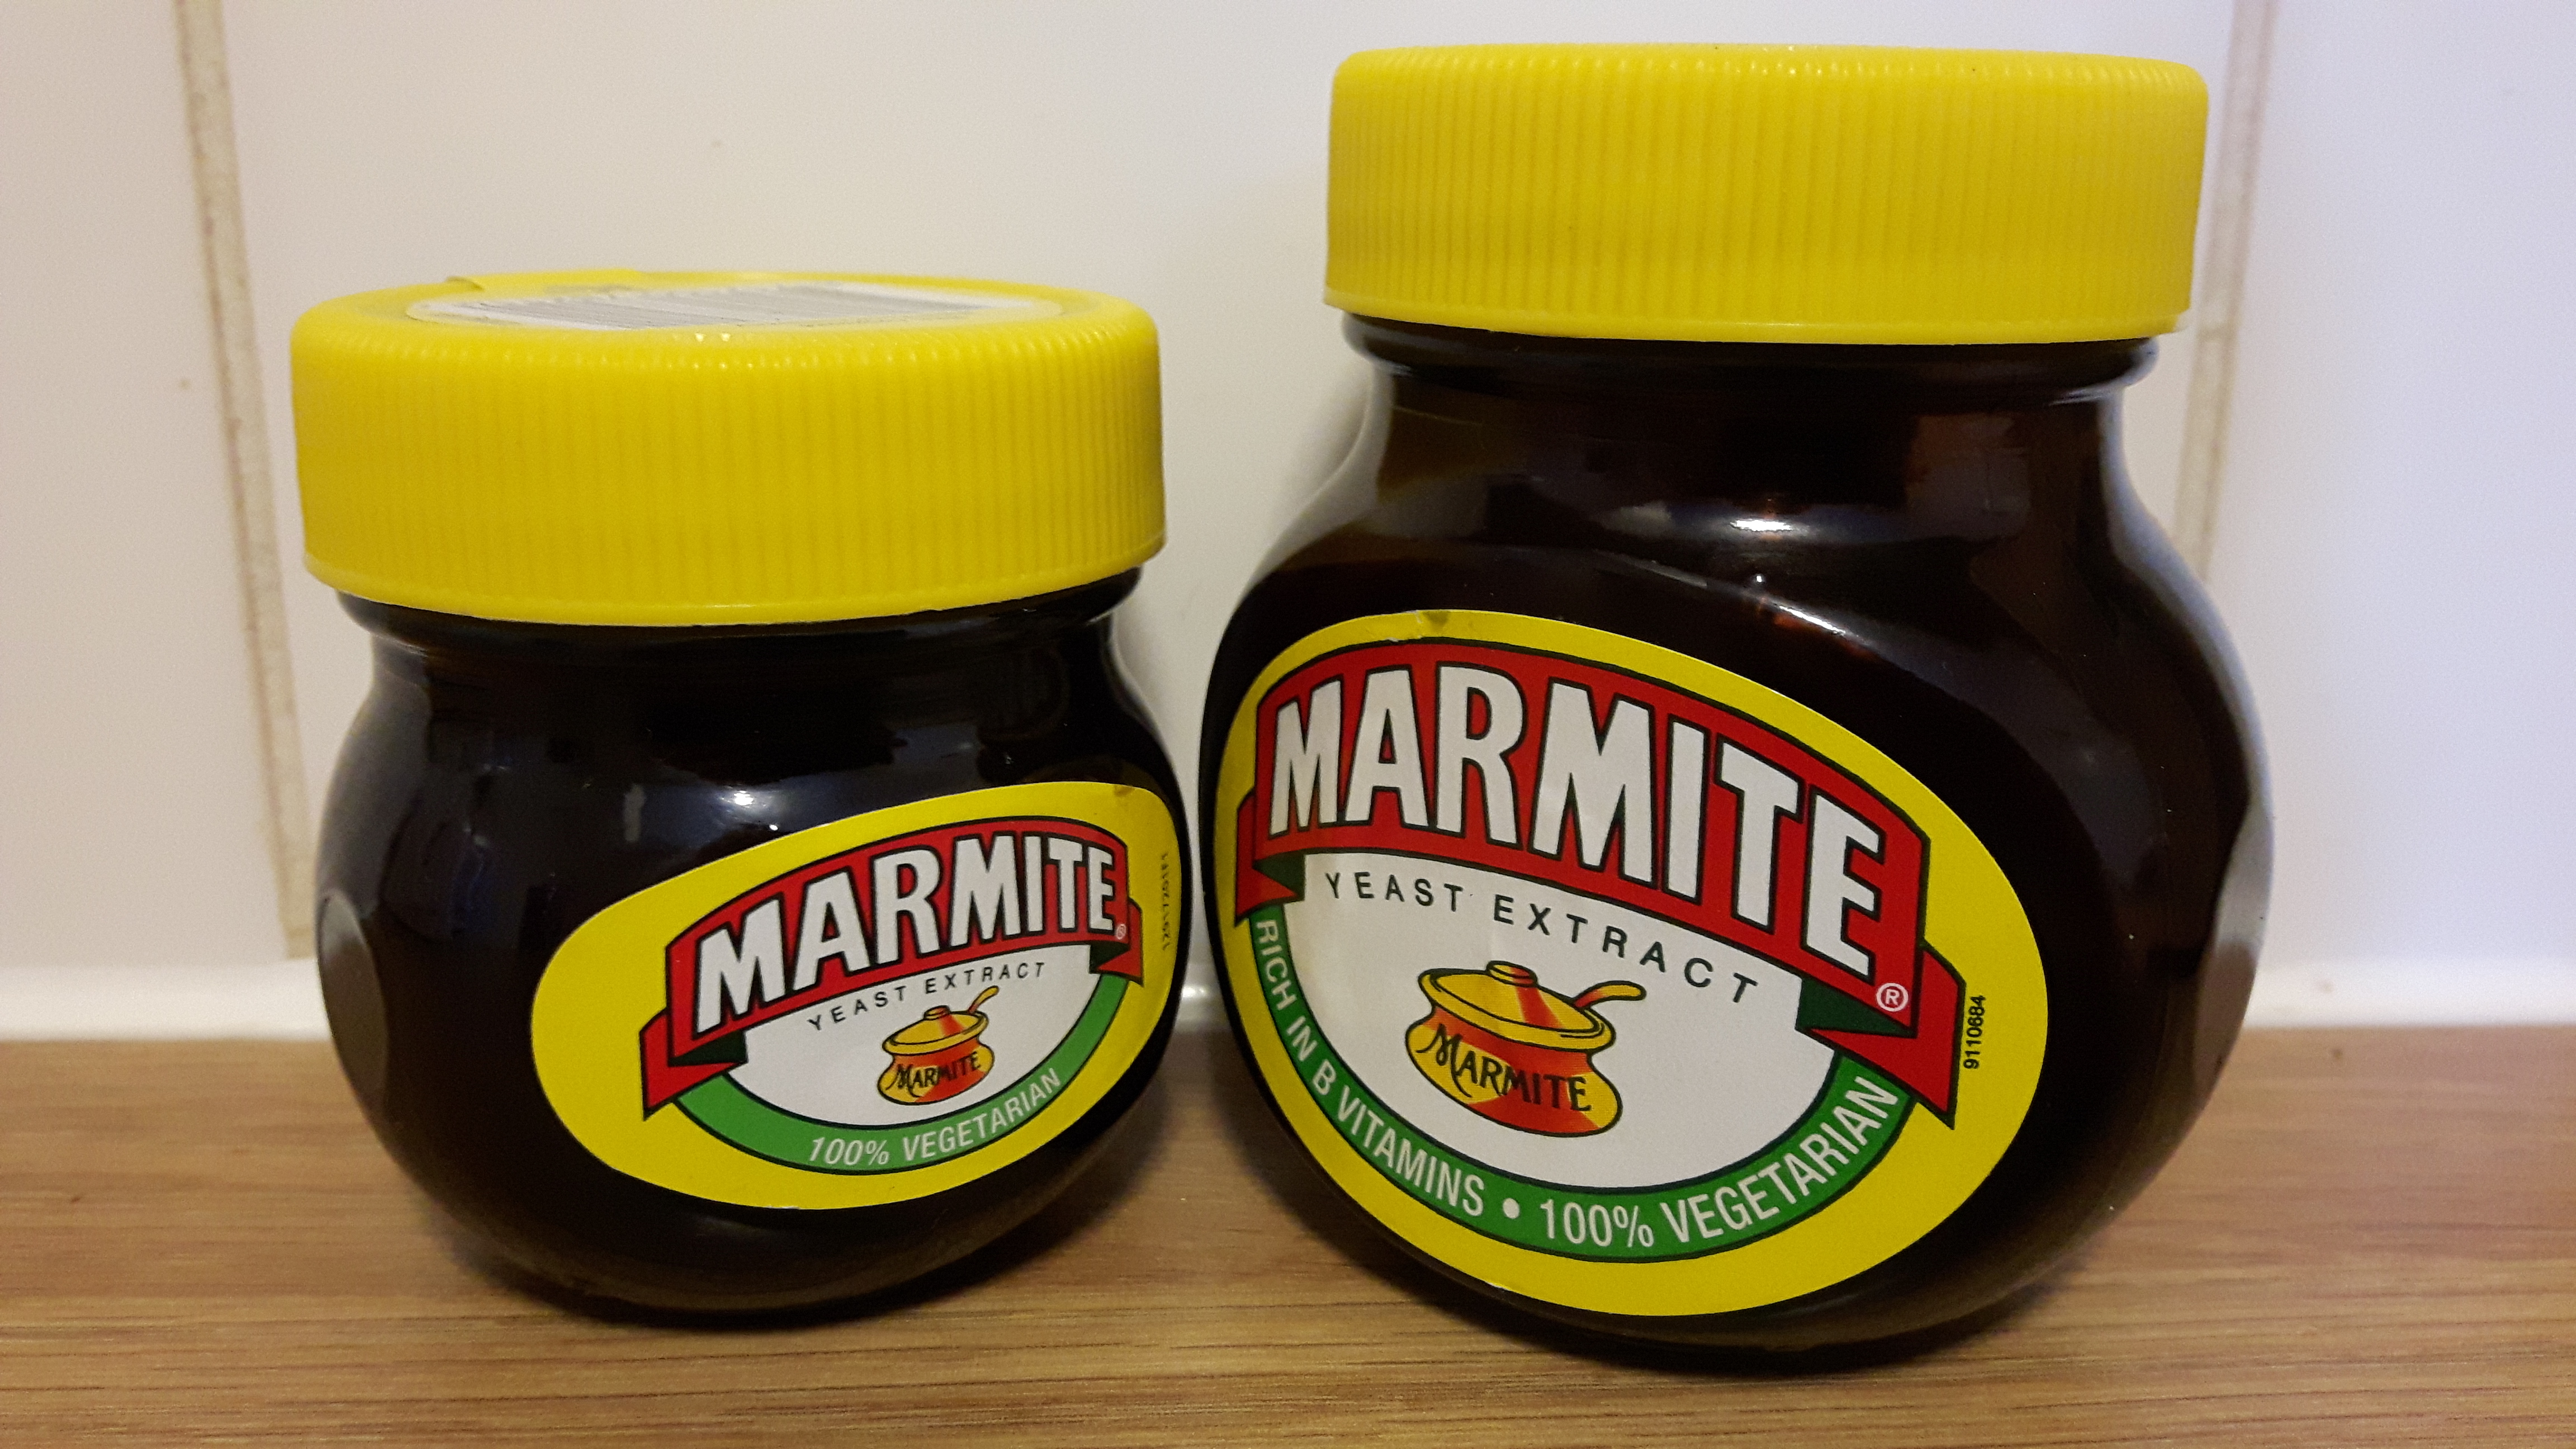 Two jars of marmite. The jar on the left is slightly smaller. They stand on a wooden countertop in front of a white tiled wall. The jars are clean and seemingly unused.